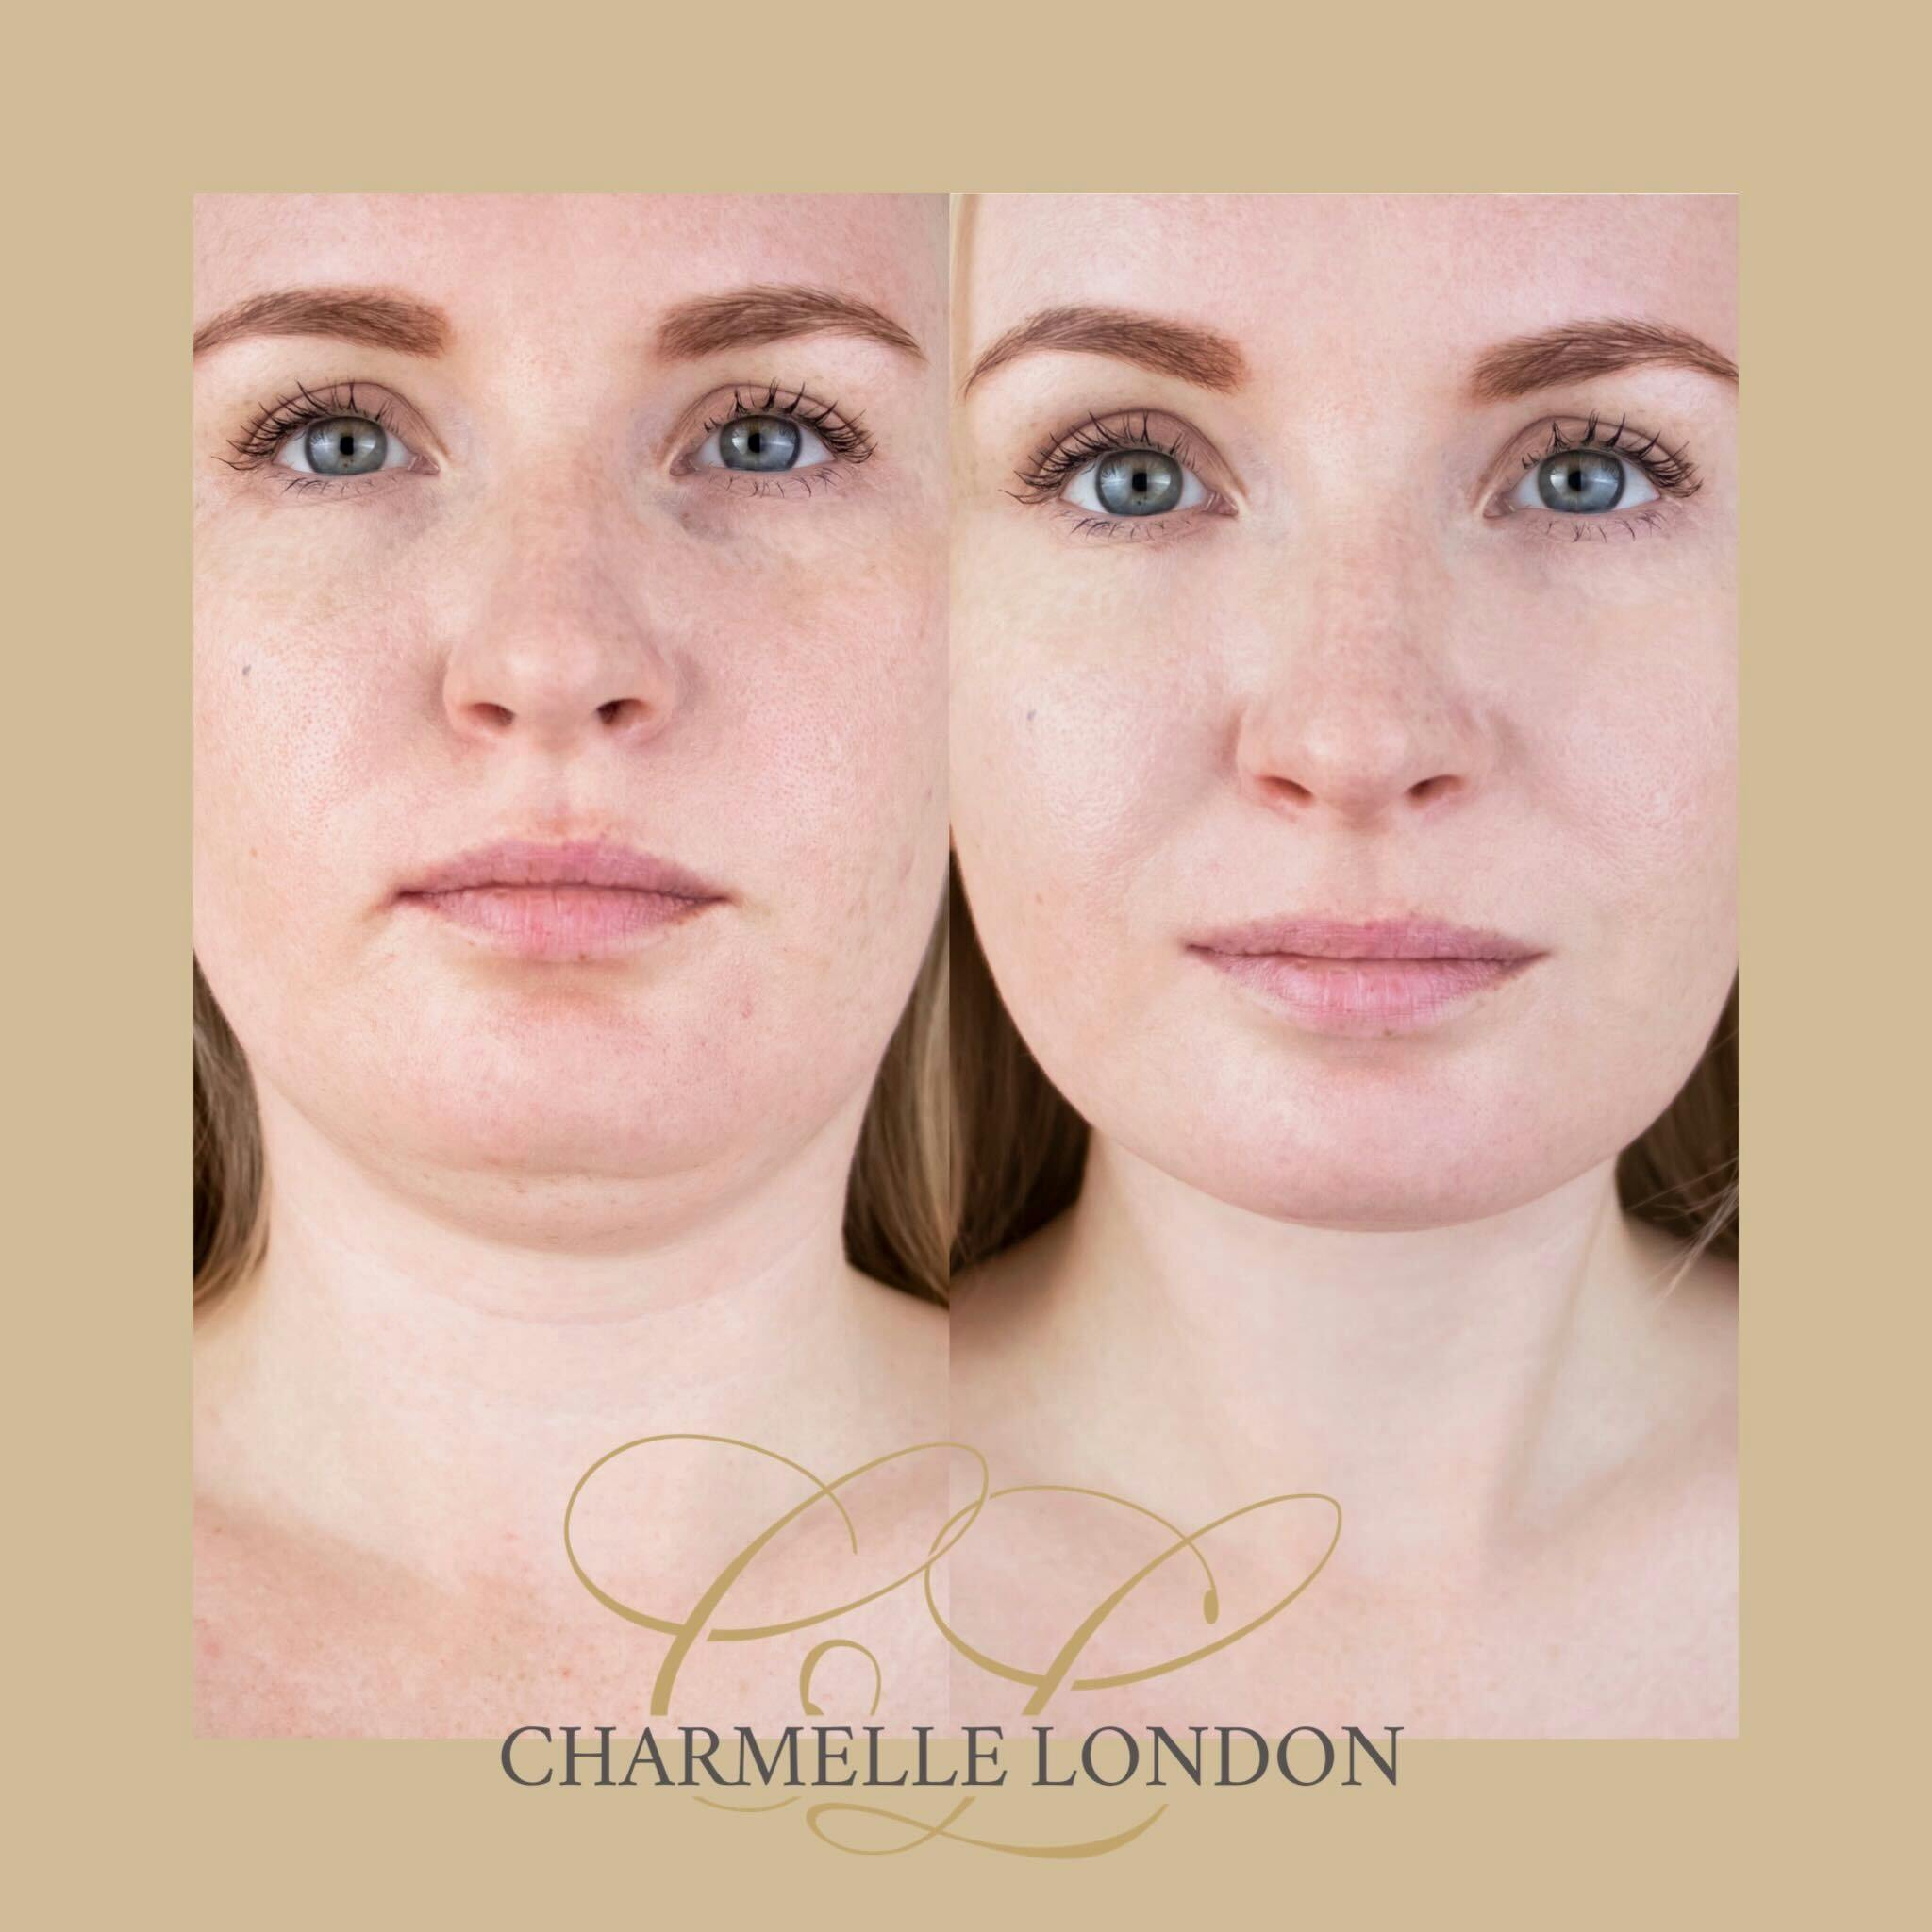 Struggling with stubborn fat that just won't budge, no matter how much you exercise or maintain a good diet? At Charmelle London, we offer Aqualyx Fat Dissolving Injections, a popular and effective body sculpting treatment that targets and eliminates stubborn fat in problem areas.